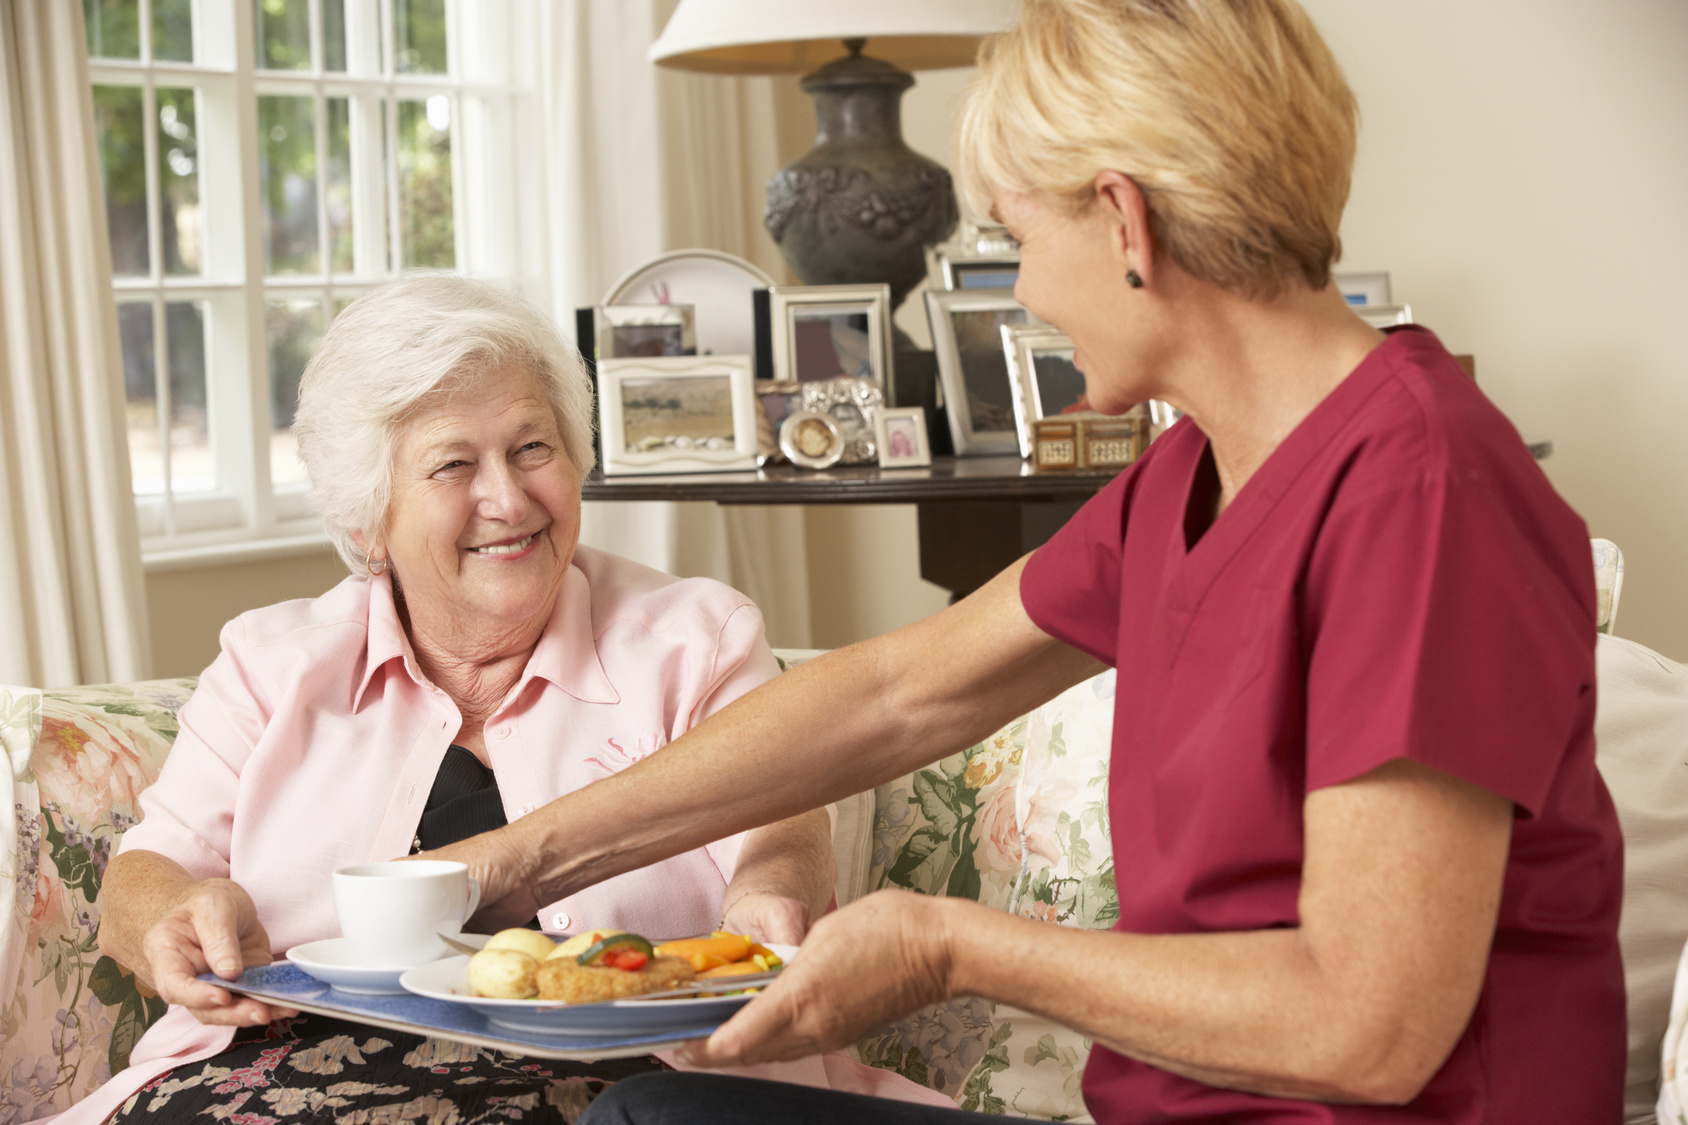 Home Health Care Services near Hinsdale, IL